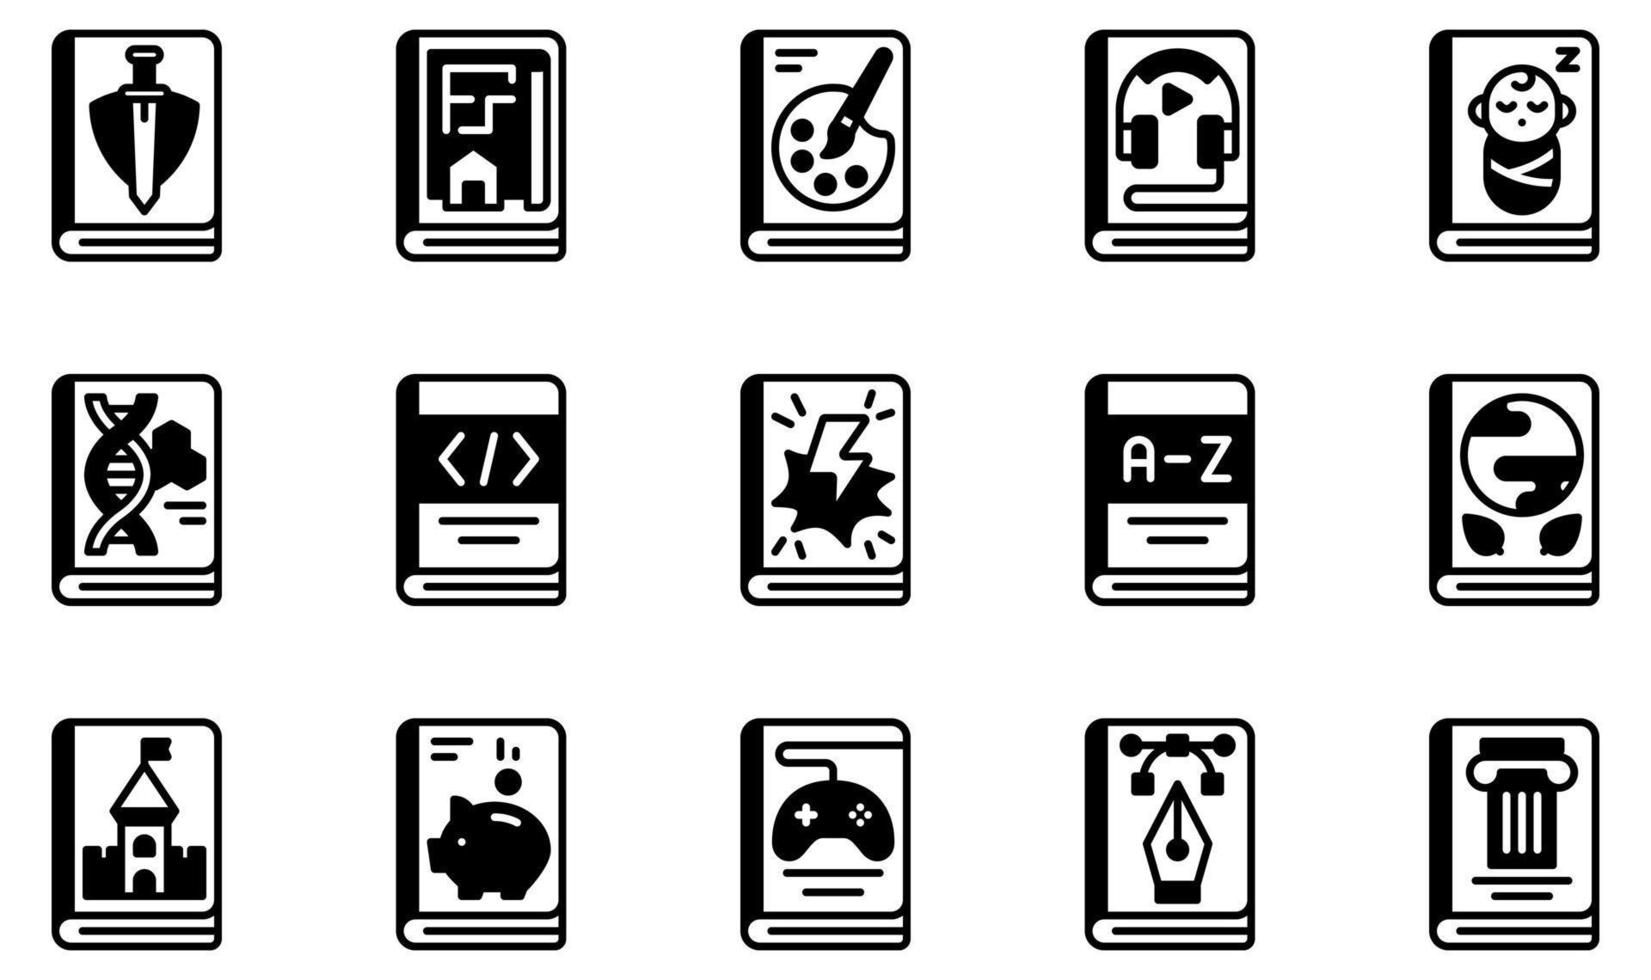 Set of Vector Icons Related to Books. Contains such Icons as Adventure Book, Art Book, Audiobook, Baby Book, Coding Book, Dictionary and more.